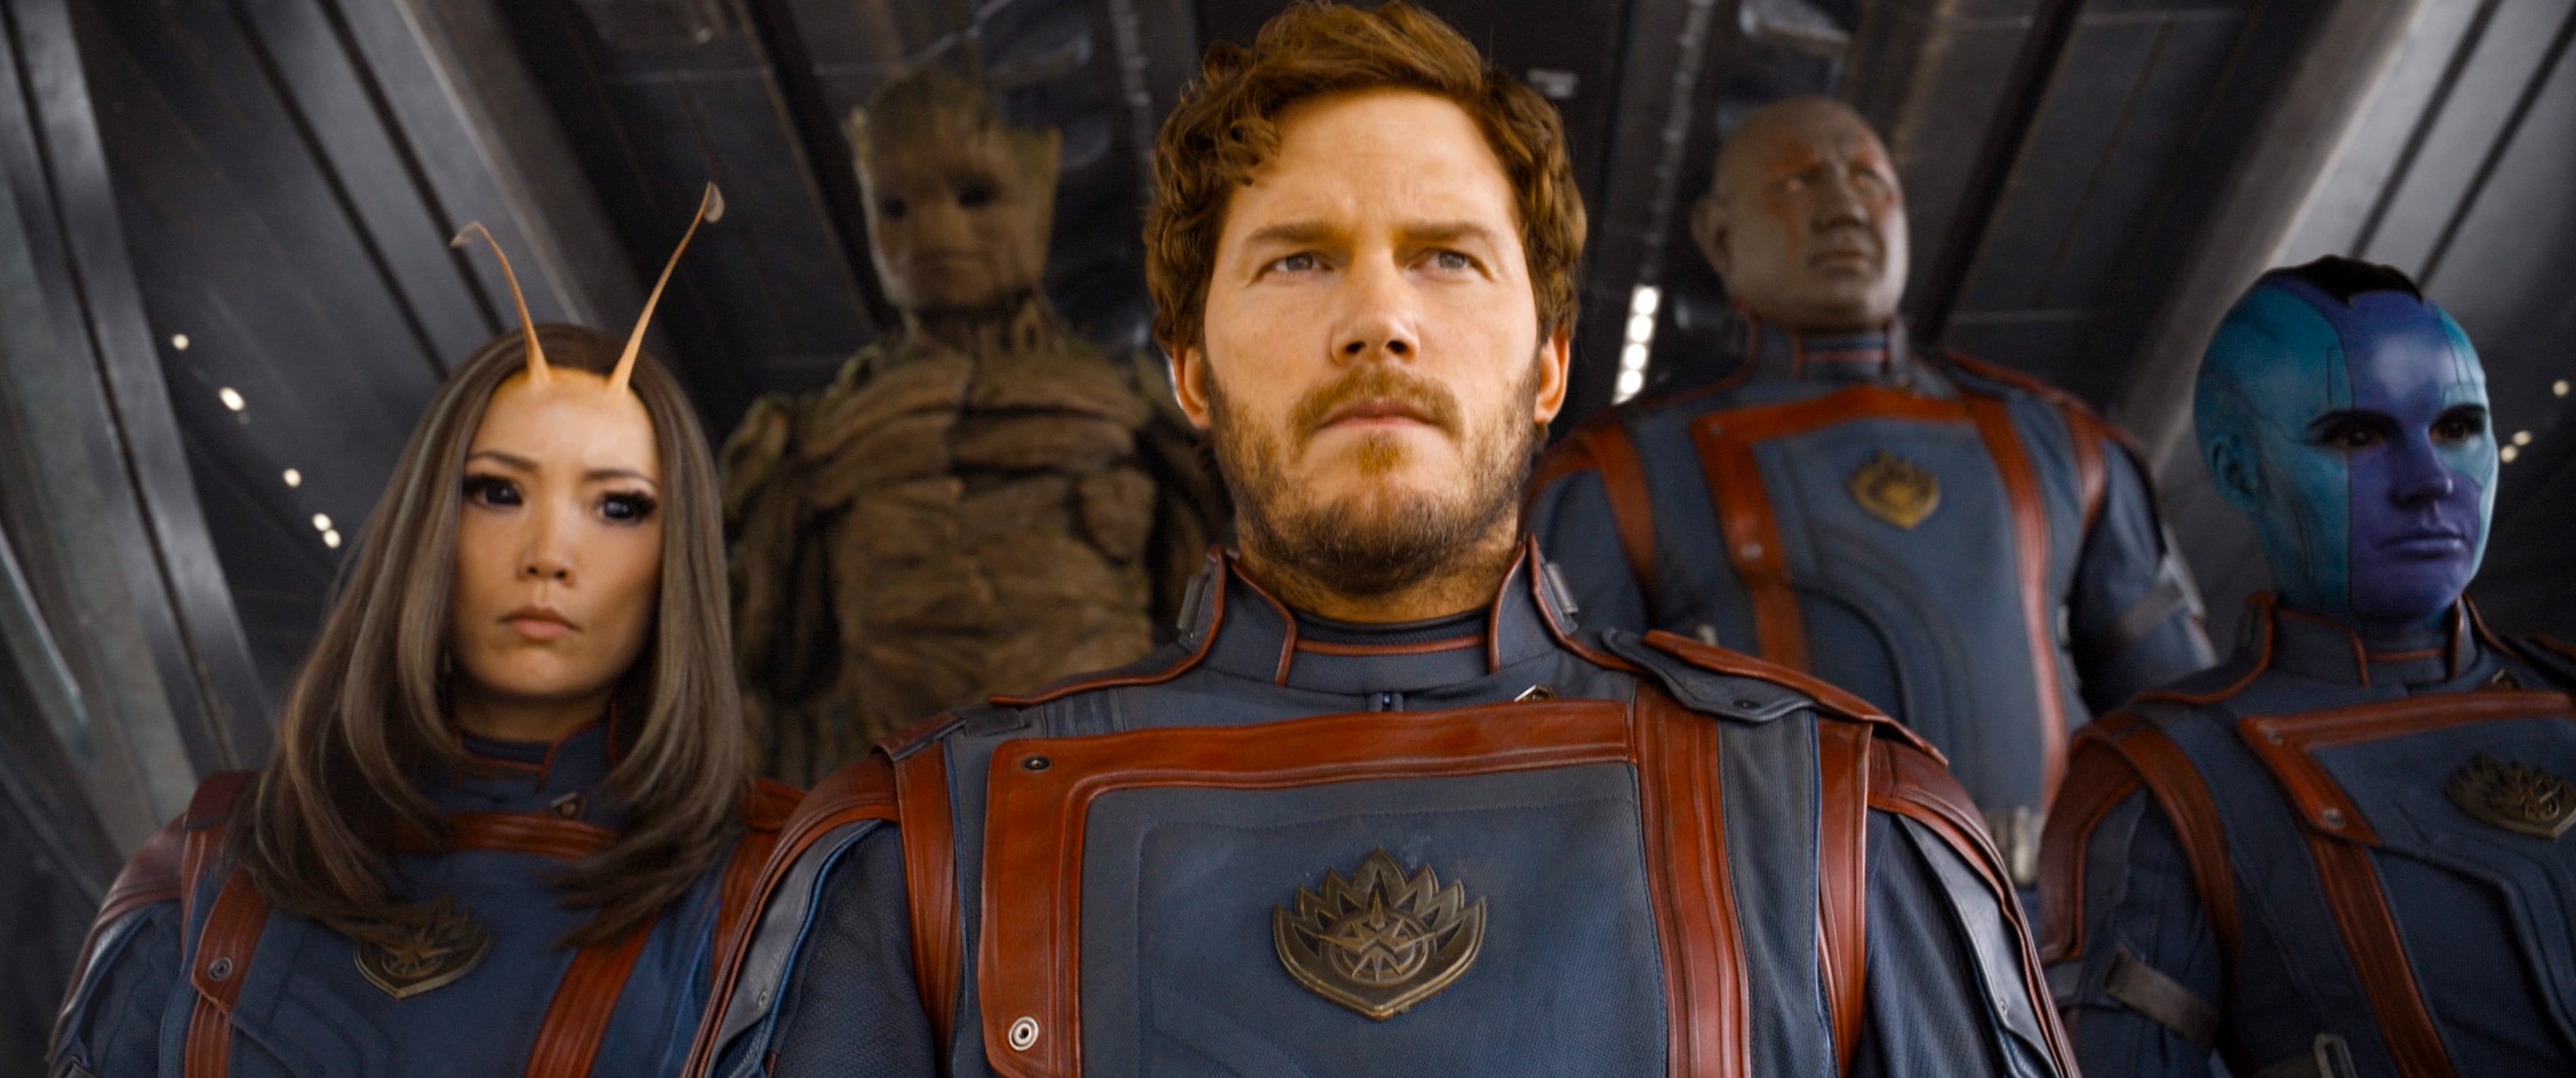 guardians of the galaxy movie characters